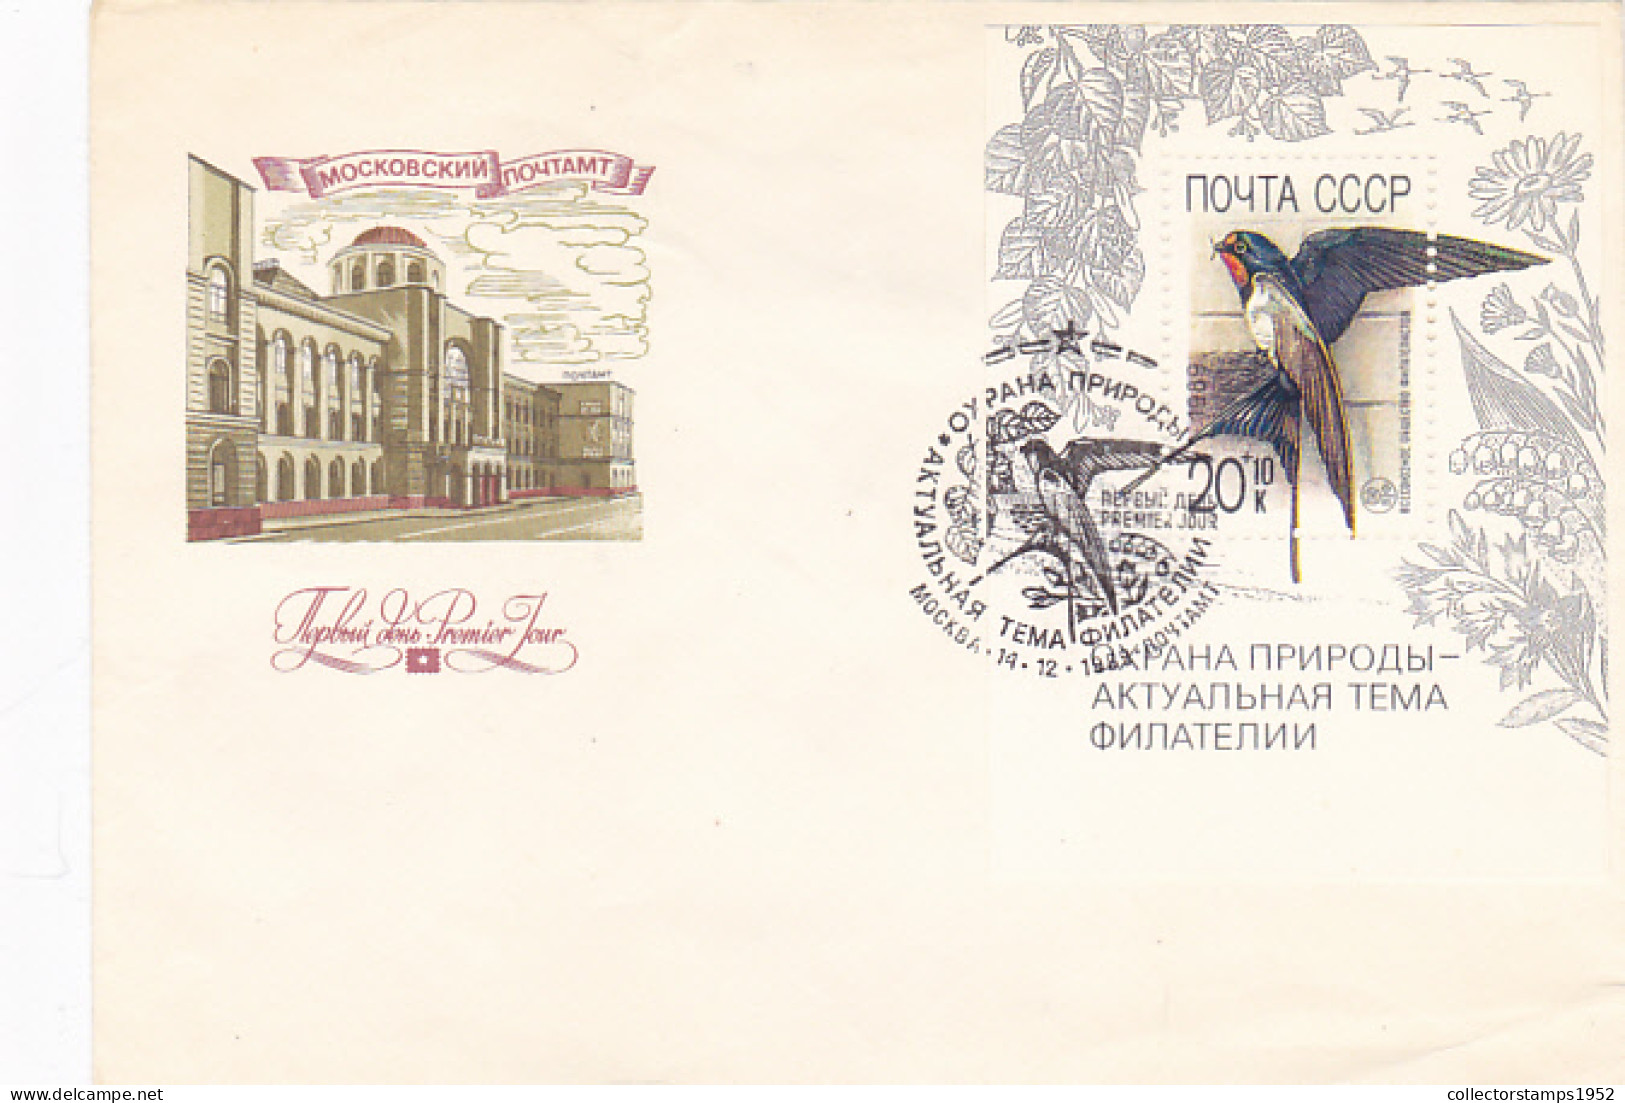 SWALLOW, BIRDS, ANIMALS, SPECIAL POSTMARK AND STAMP SHEET ON MOSCOW POST OFFICE COVER FDC, 1989, RUSSIA-USSR - Golondrinas